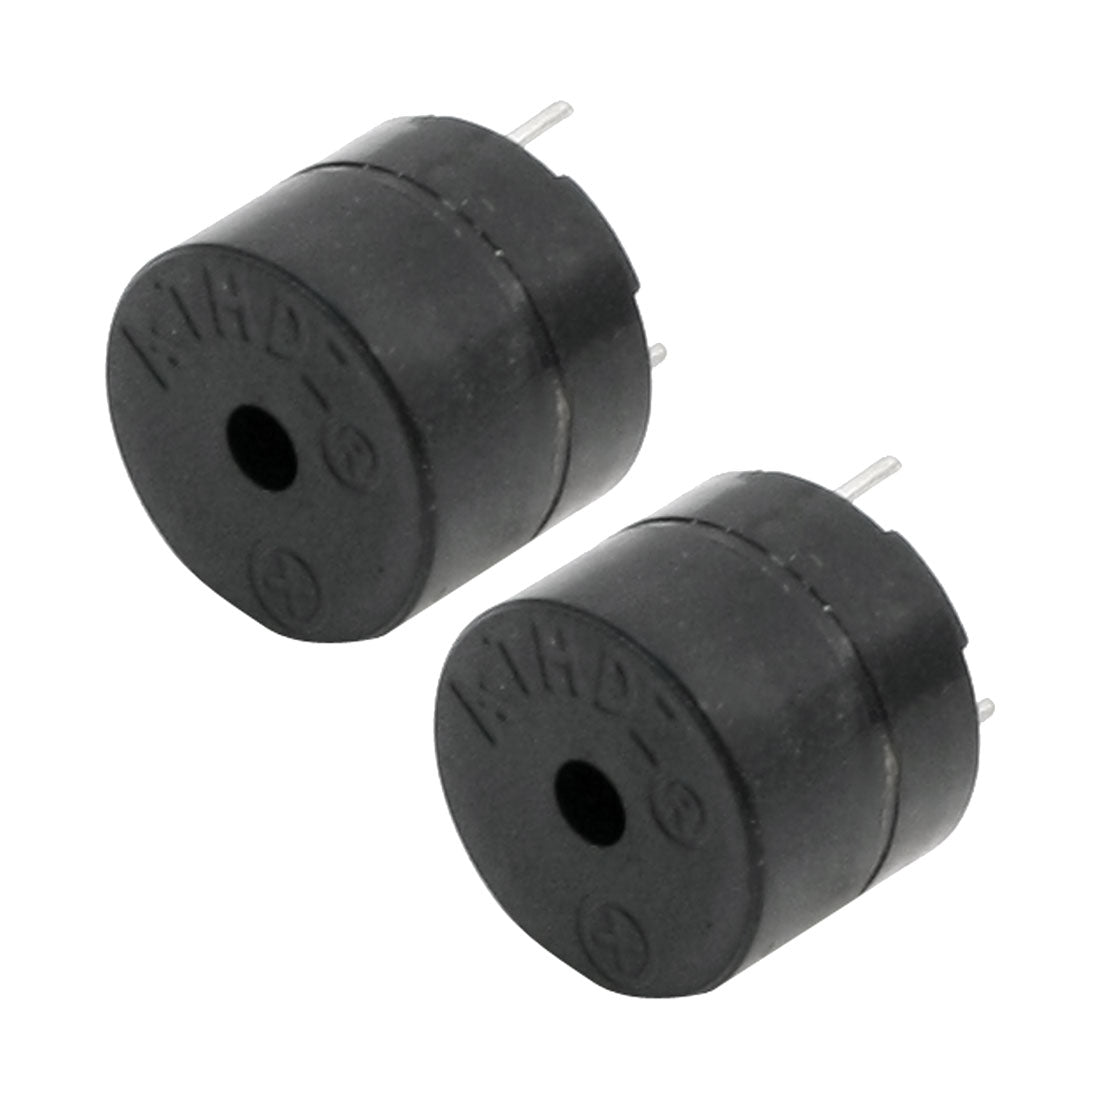 uxcell Uxcell DC 5V 85dB Industrial Black Active Electronic Buzzer 2pcs